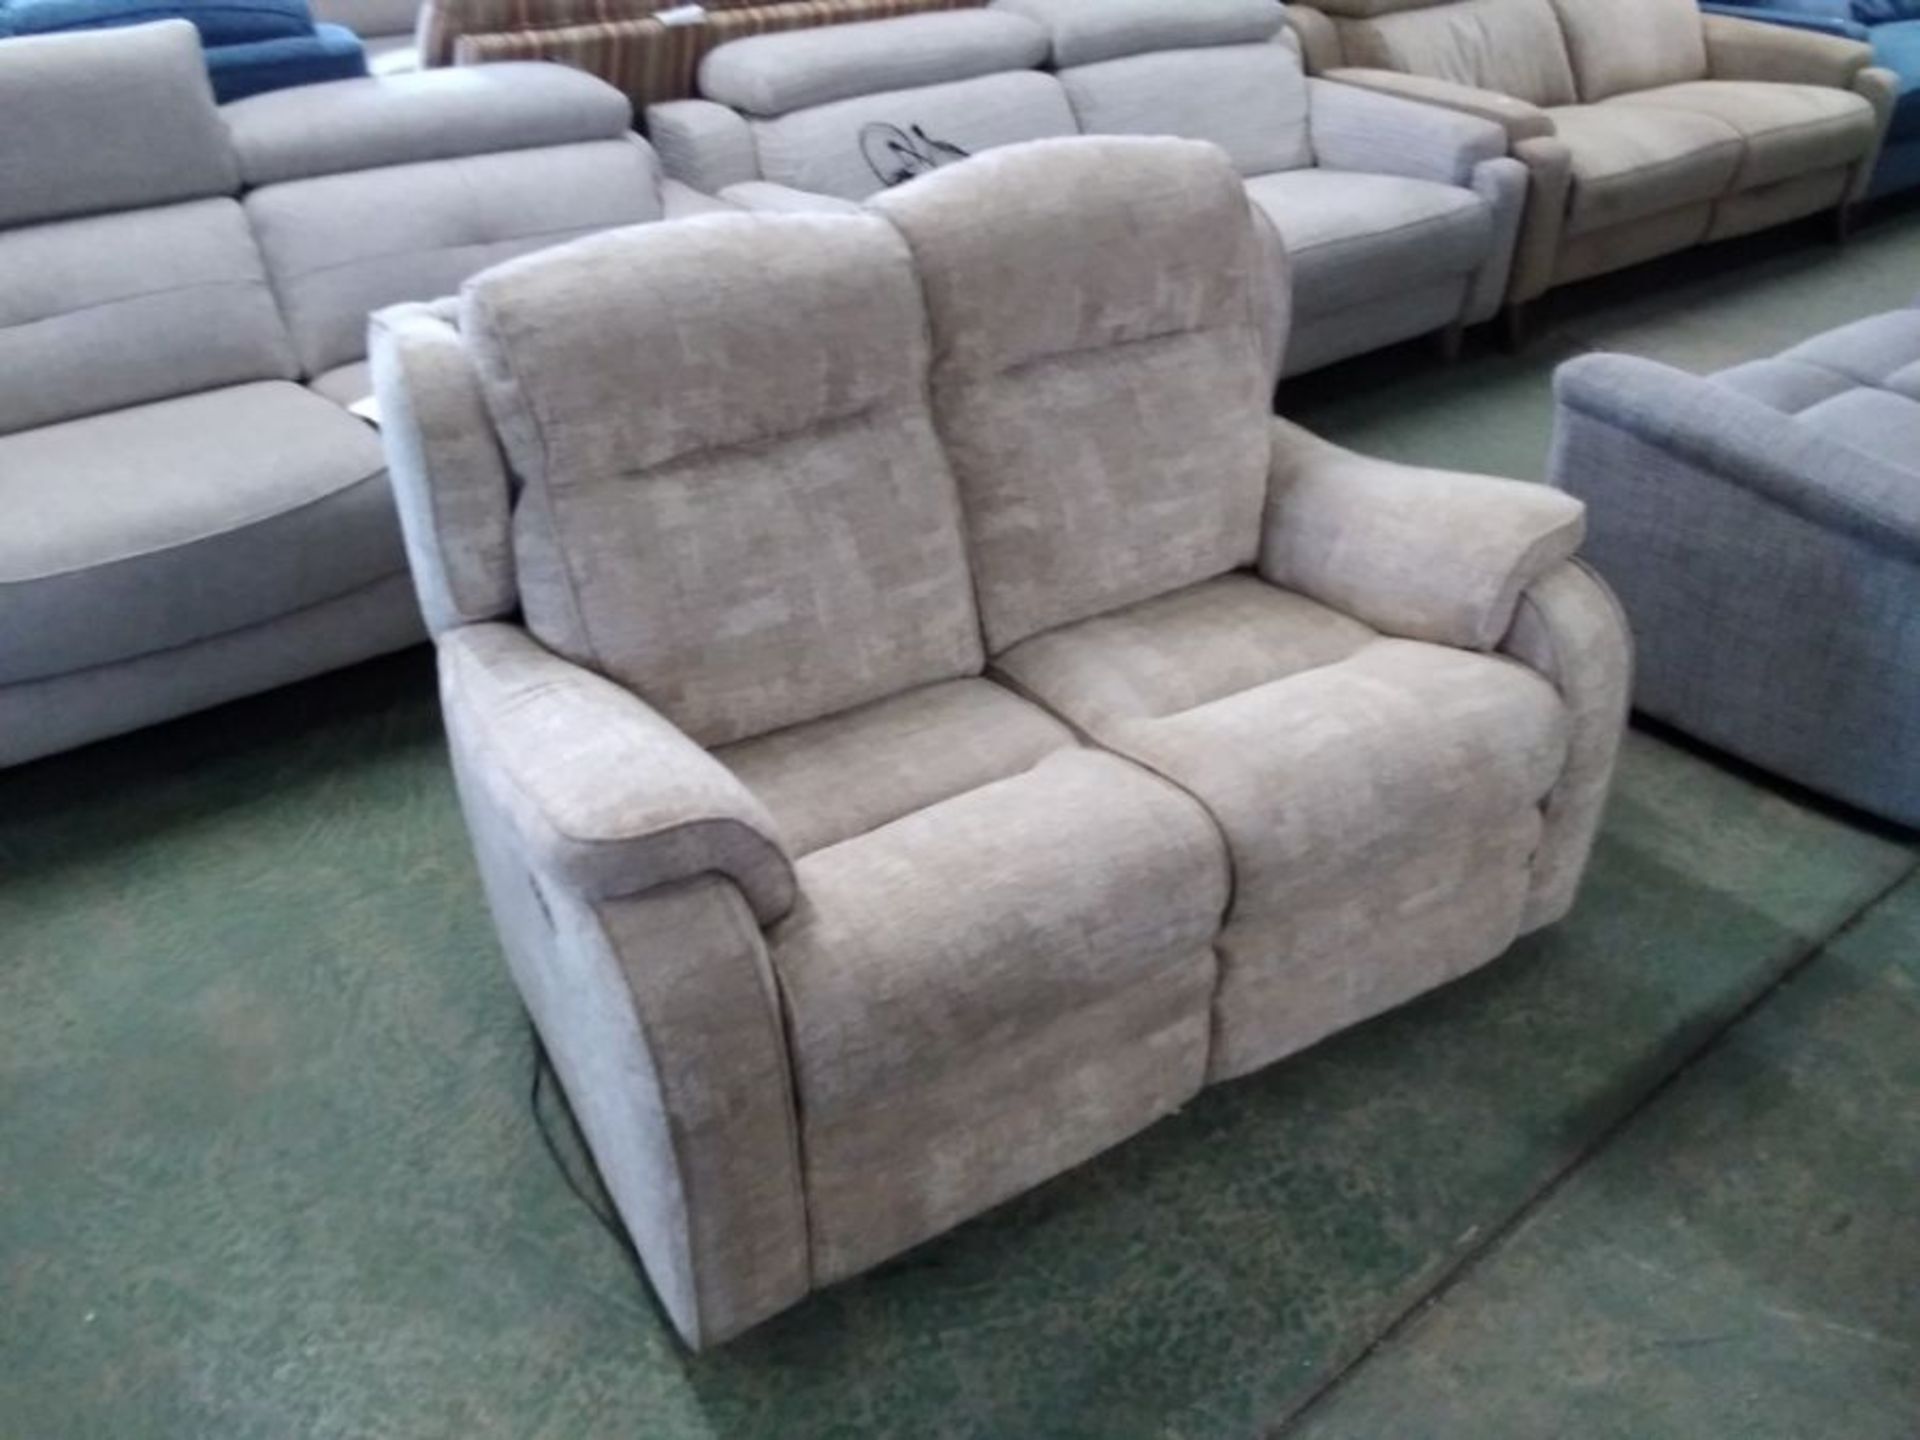 BEIGE PATTERNED ELECTRIIC RECLINING 2 SEATER SOFA